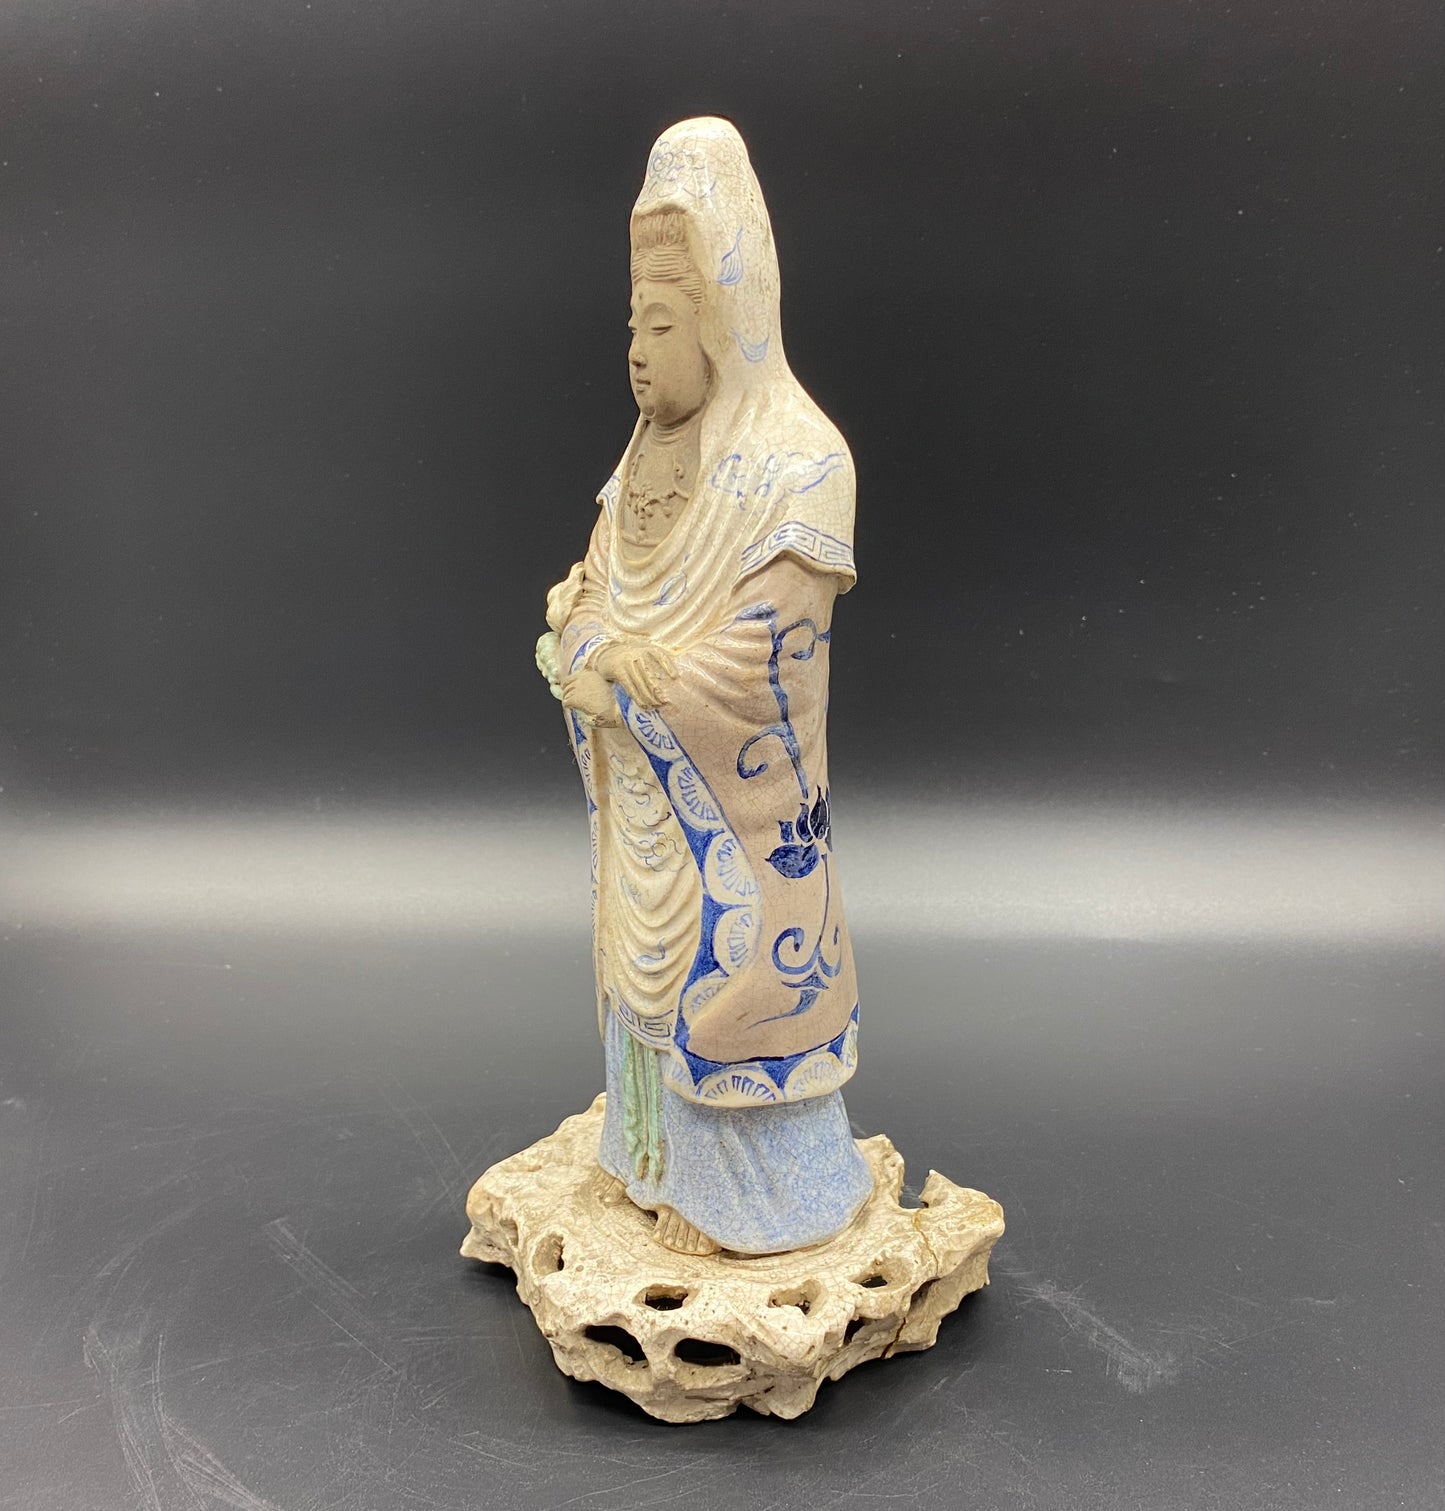 RARE Unusual & Extremely well Modelled Japanese Edo Period Crackle Were Guan Yin Pottery Figurine BUY ANTIQUES ONLINE 